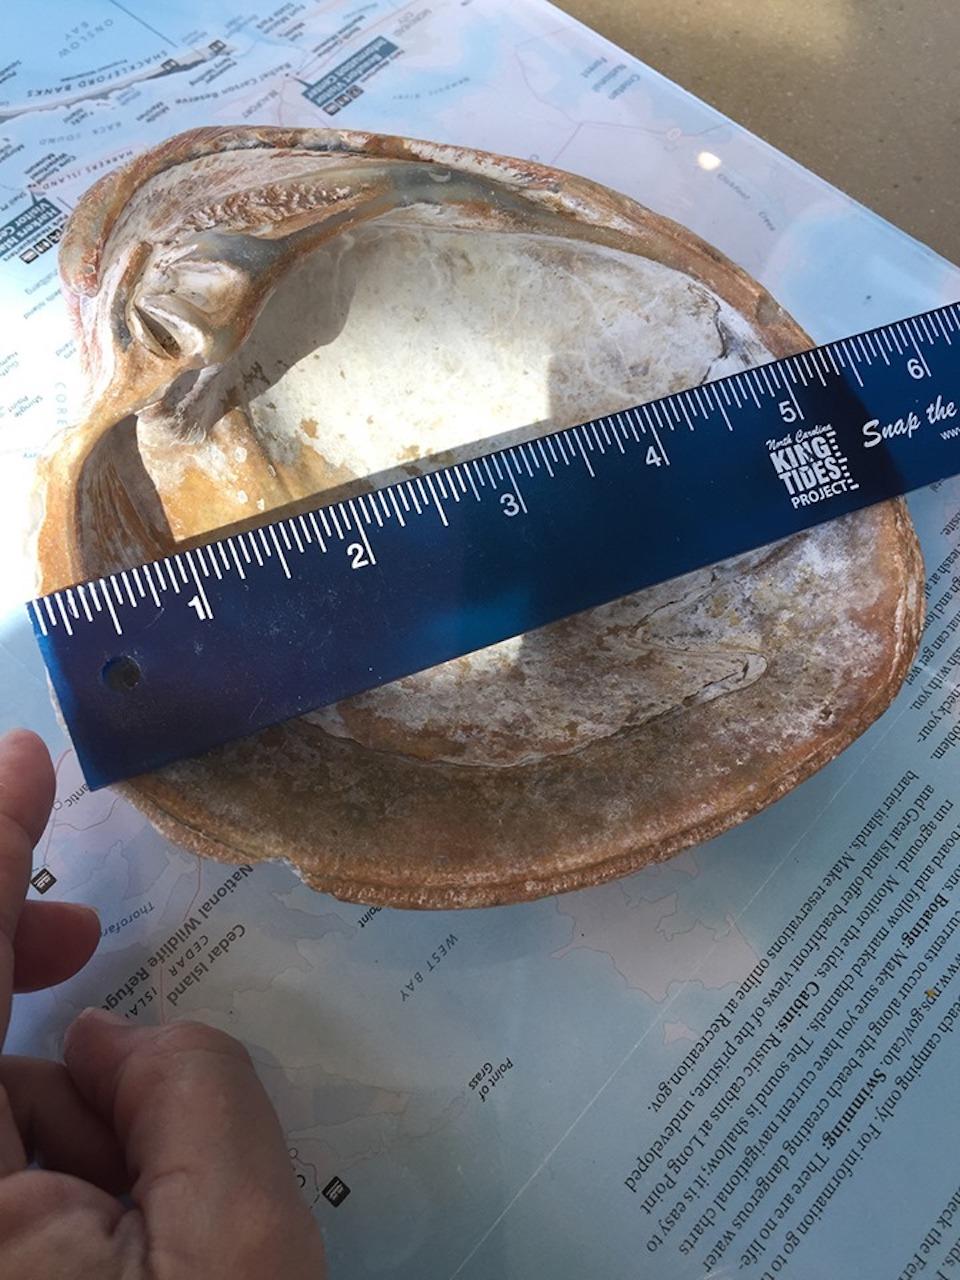 The shell measured more than 5 inches across/NPS